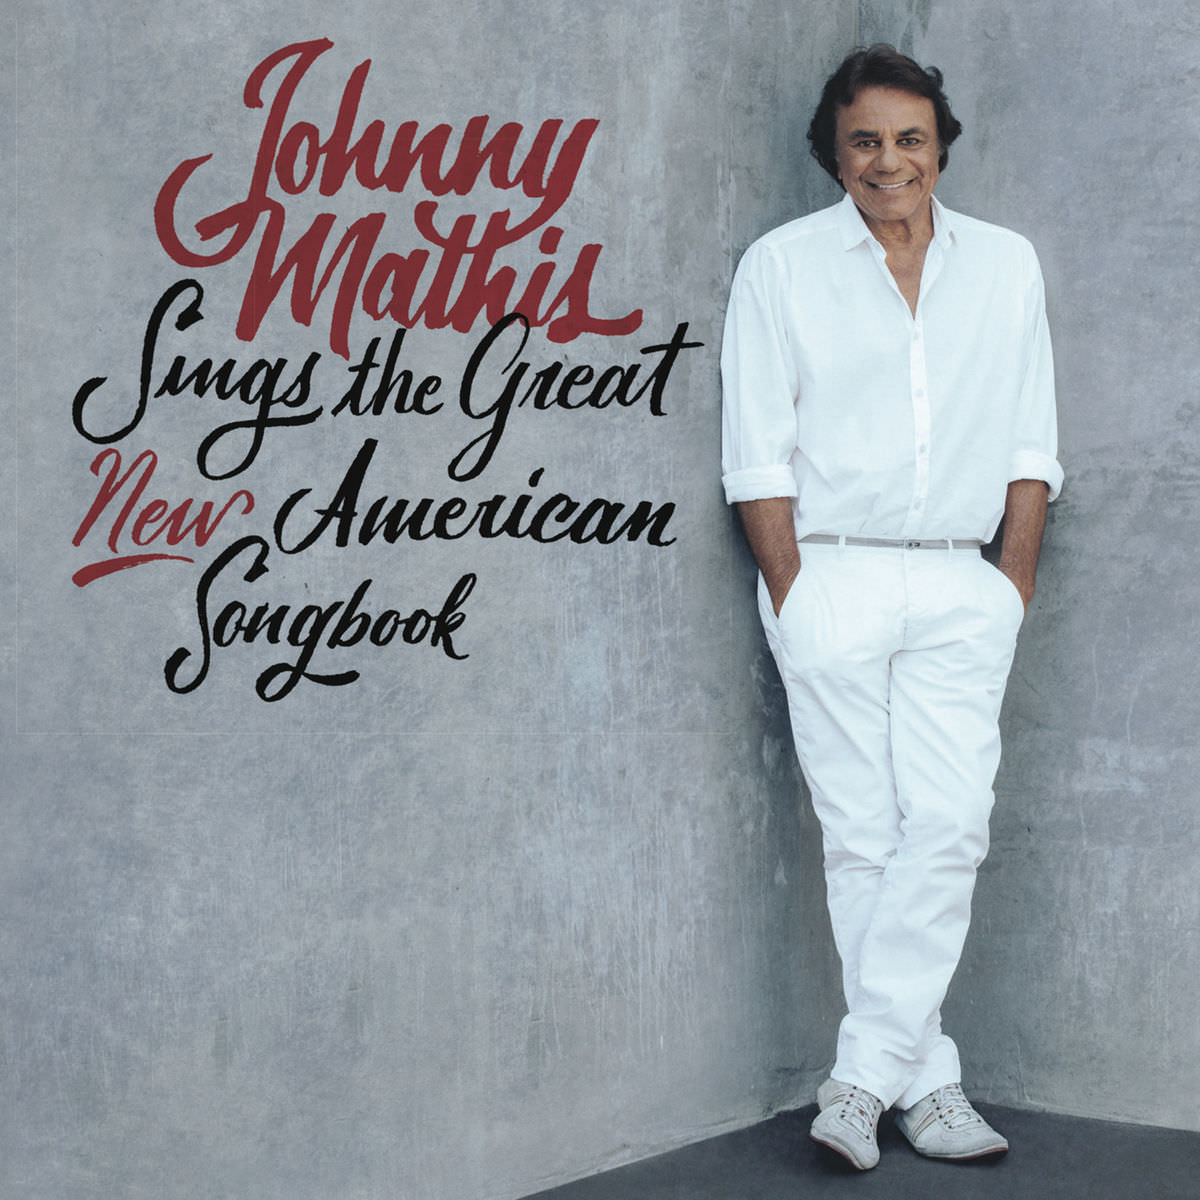 Johnny Mathis - Johnny Mathis Sings The Great New American Songbook (2017) [Qobuz FLAC 24bit/48kHz]